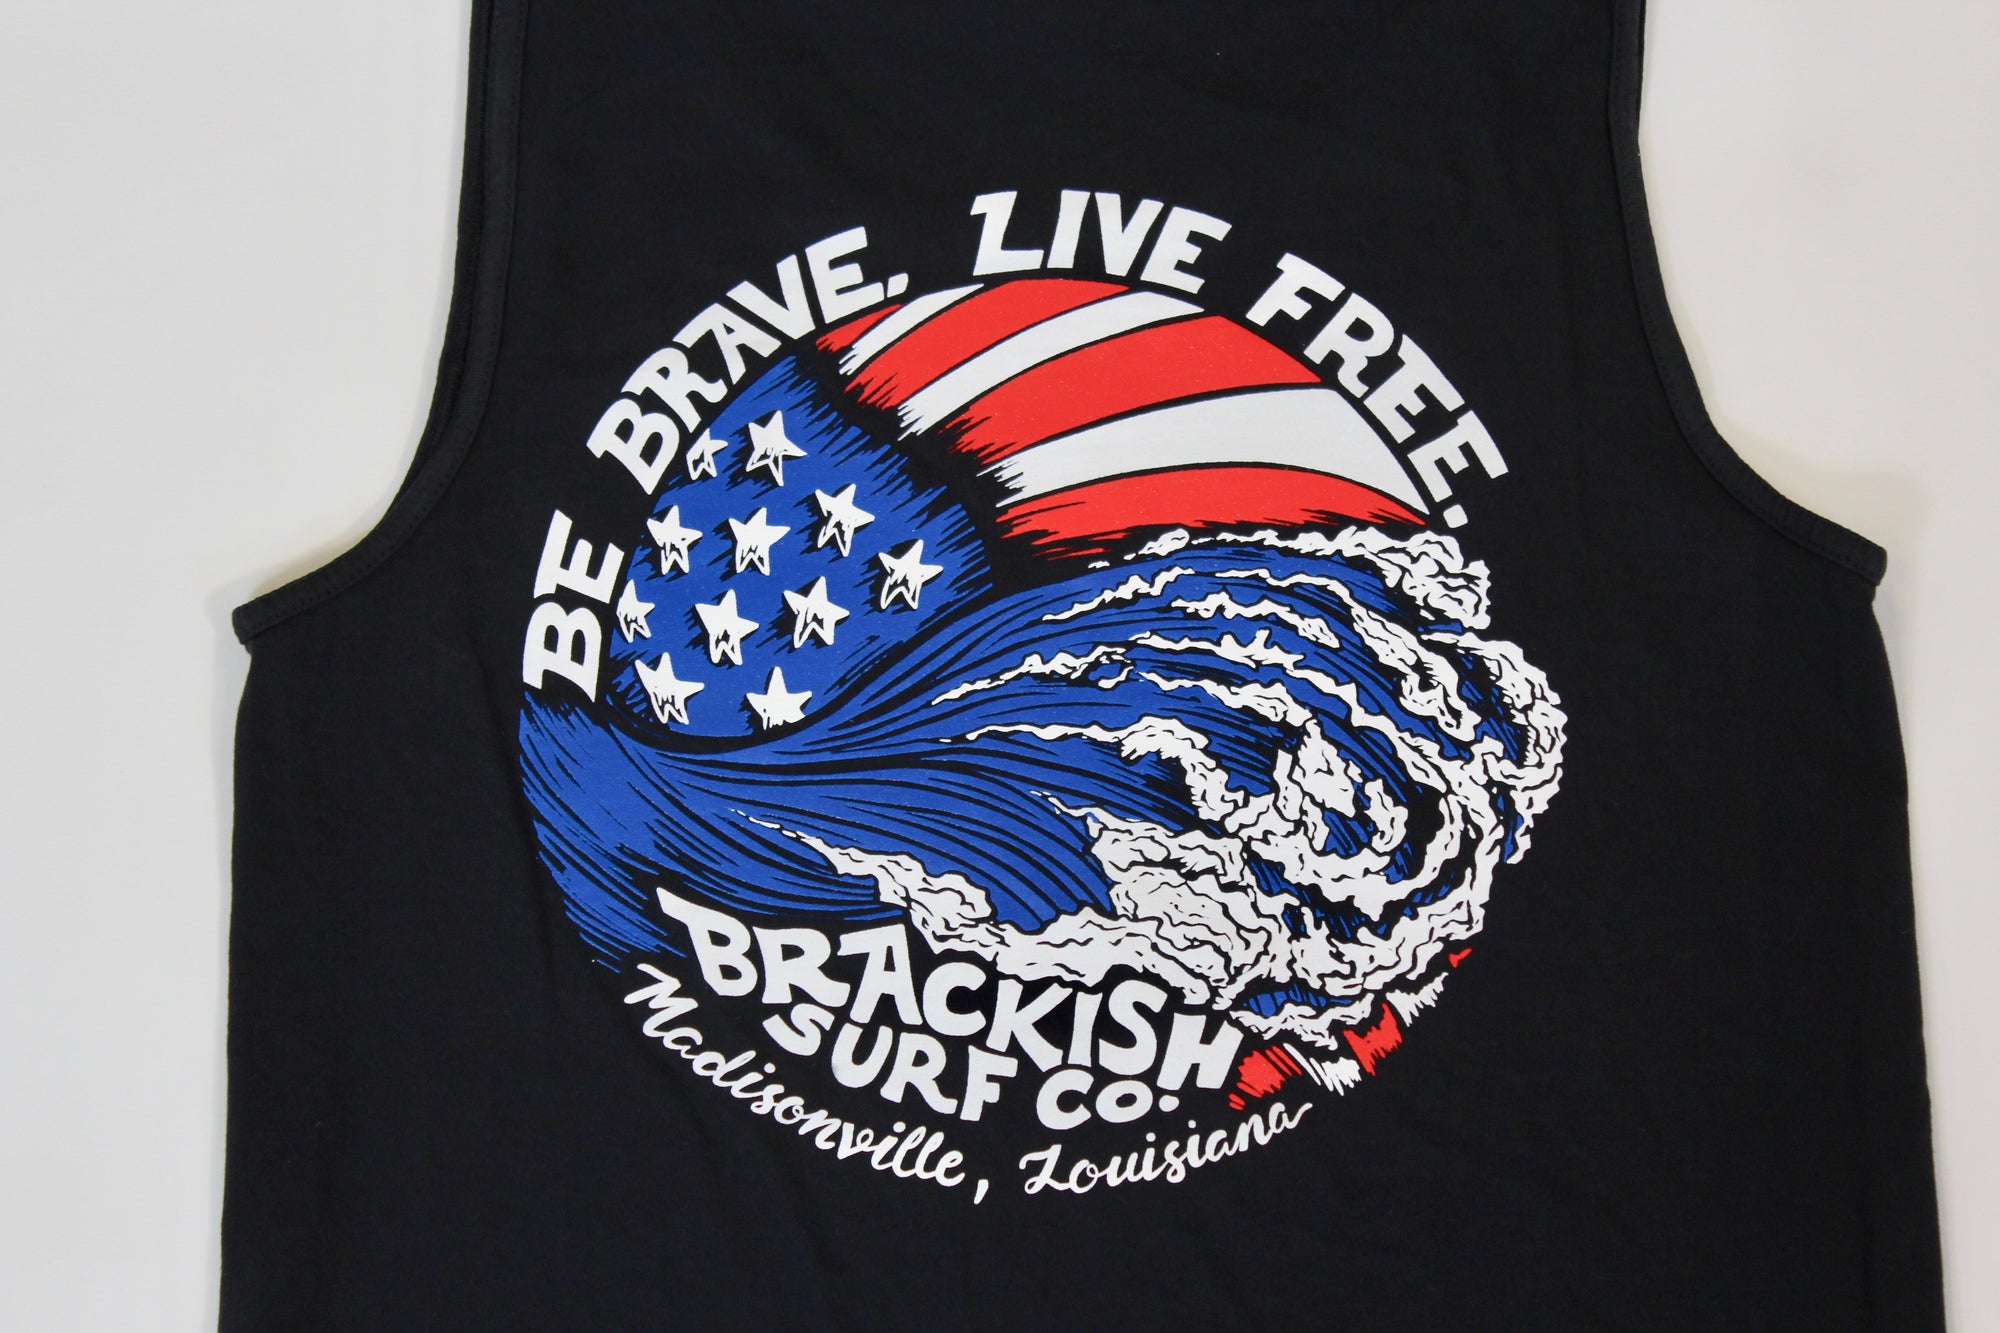 Fourth of July Tank Top